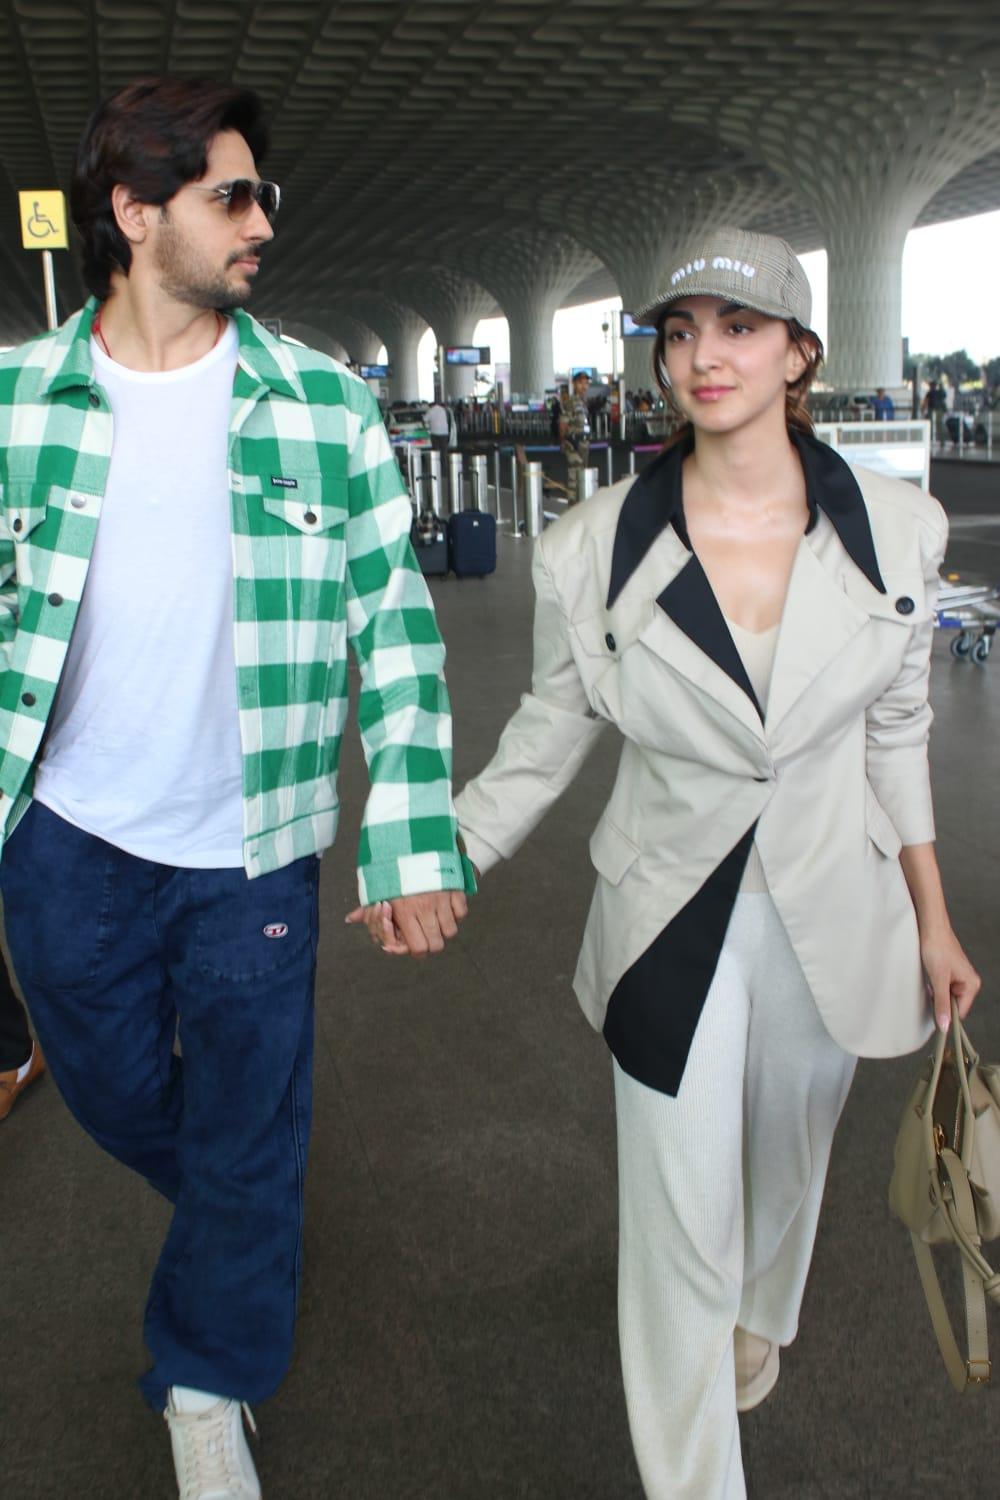 The lovebirds looked stylish as ever as they walked in the airport hand-in-hand exuding love